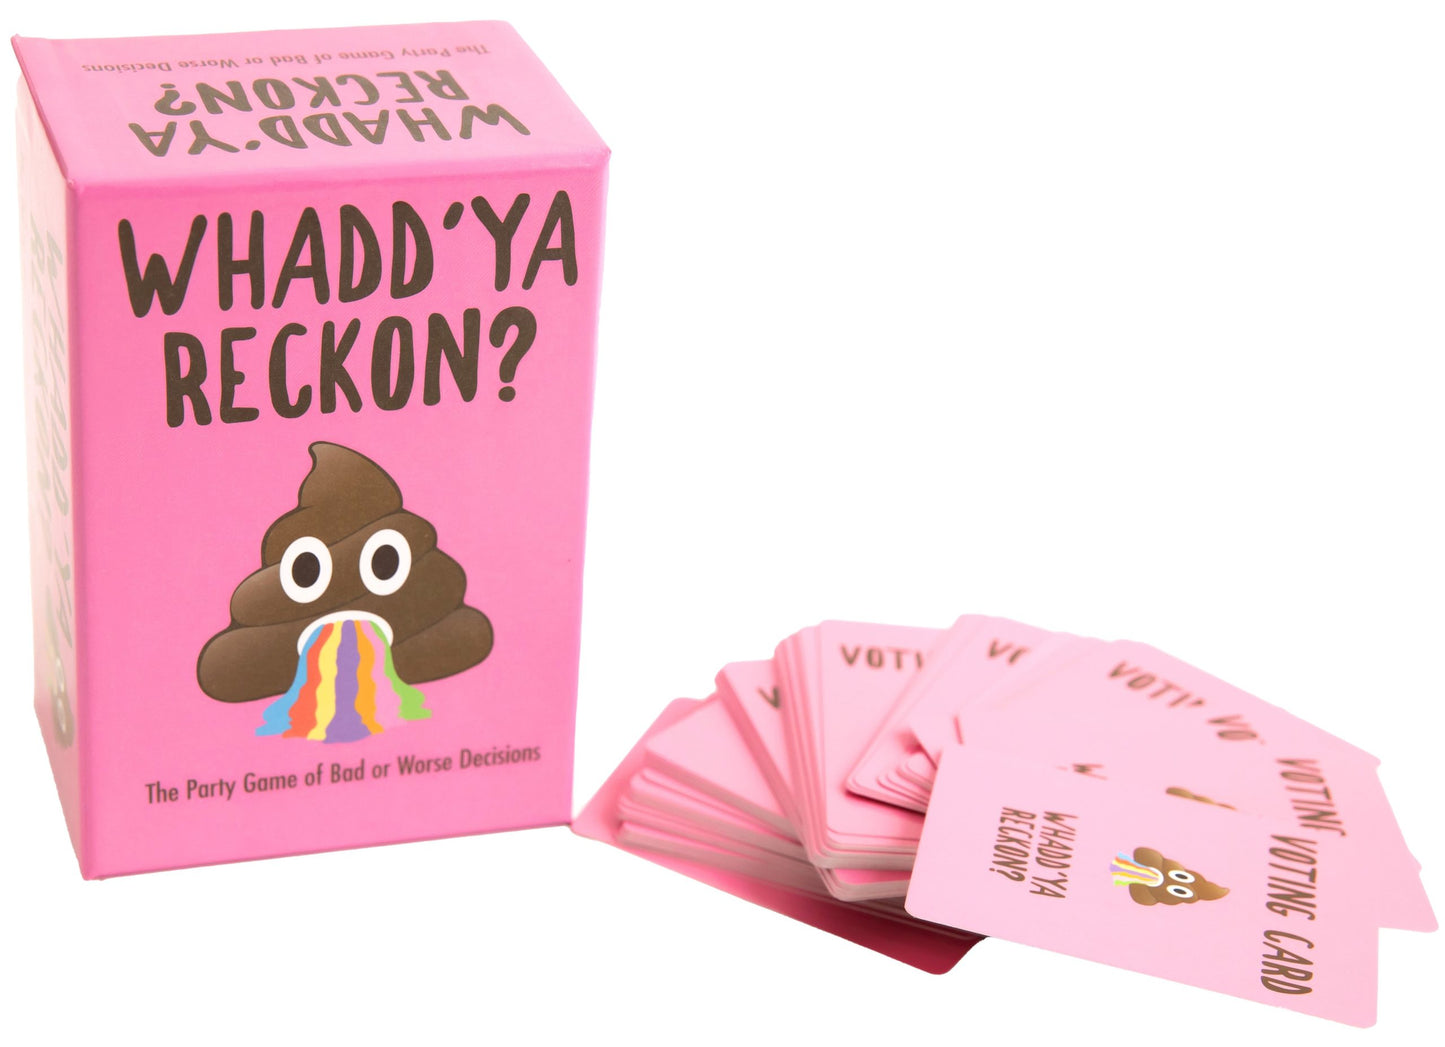 Whatdd'ya Reckon? Card Game for the twisted